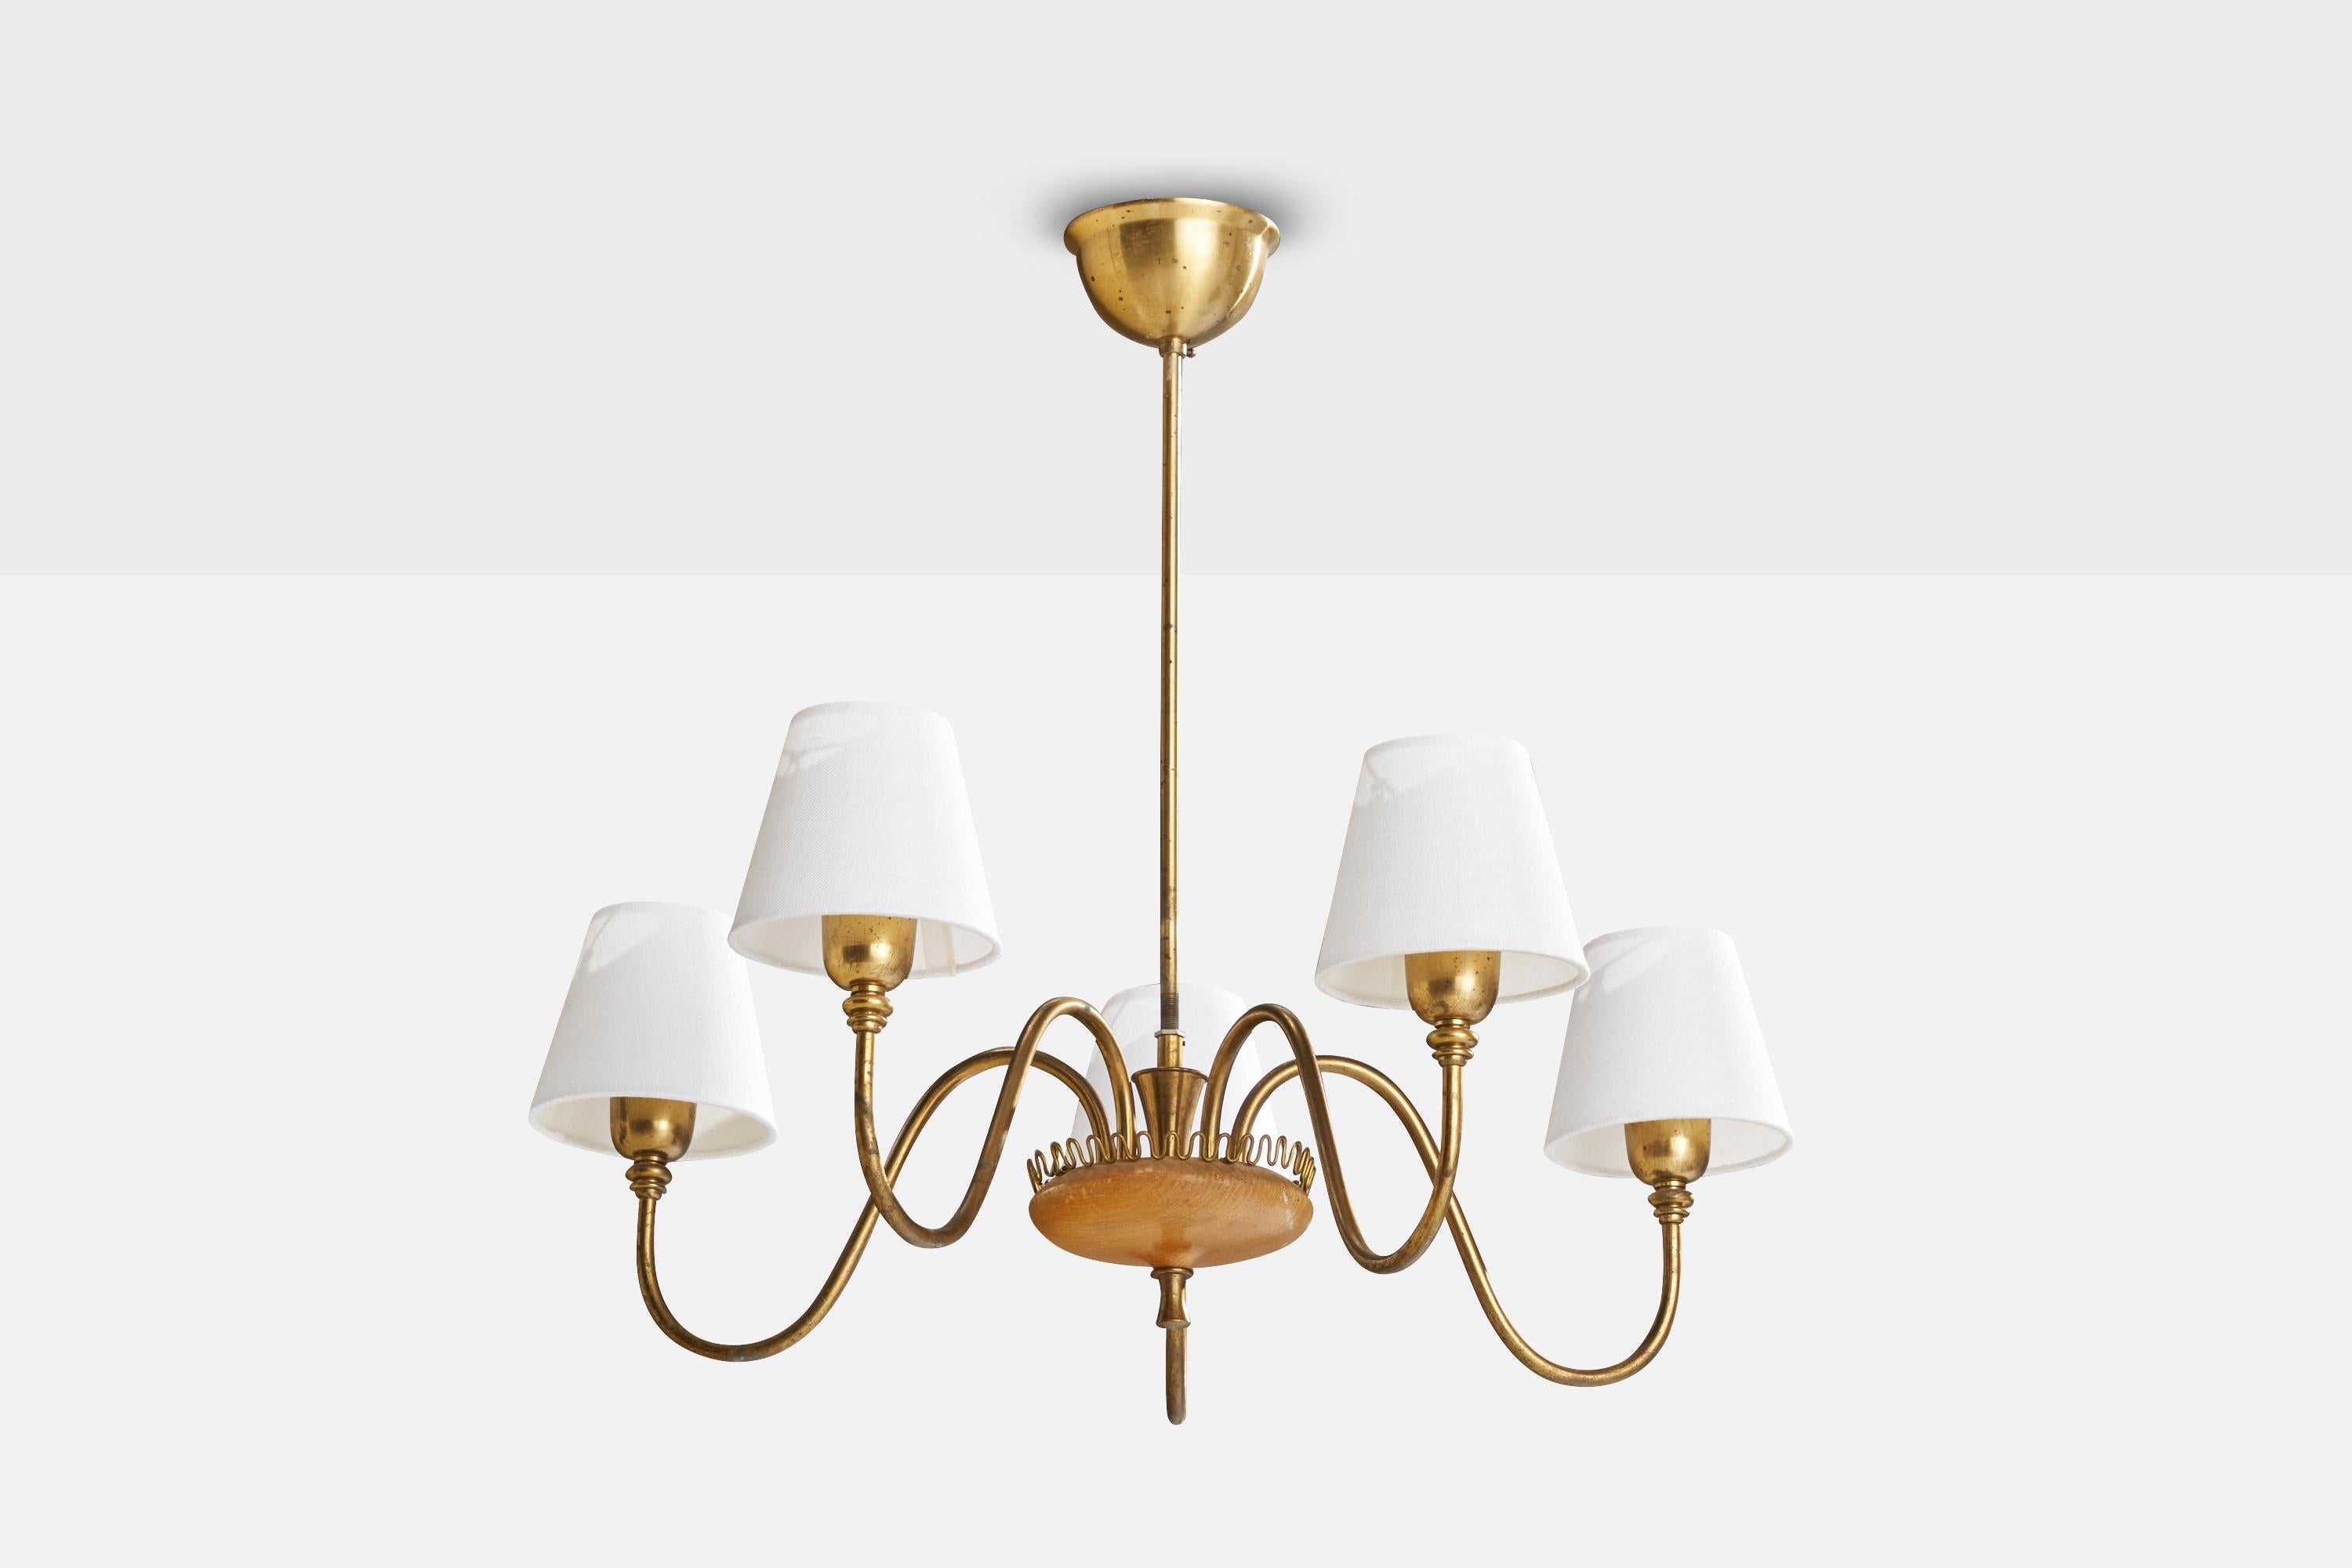 A brass, oak and white fabric chandelier designed and produced in Sweden, 1940s.

Dimensions of canopy (inches): 2.5”  H x 4.5” Diameter
Socket takes standard E-26 bulbs. 5 sockets.There is no maximum wattage stated on the fixture. All lighting will